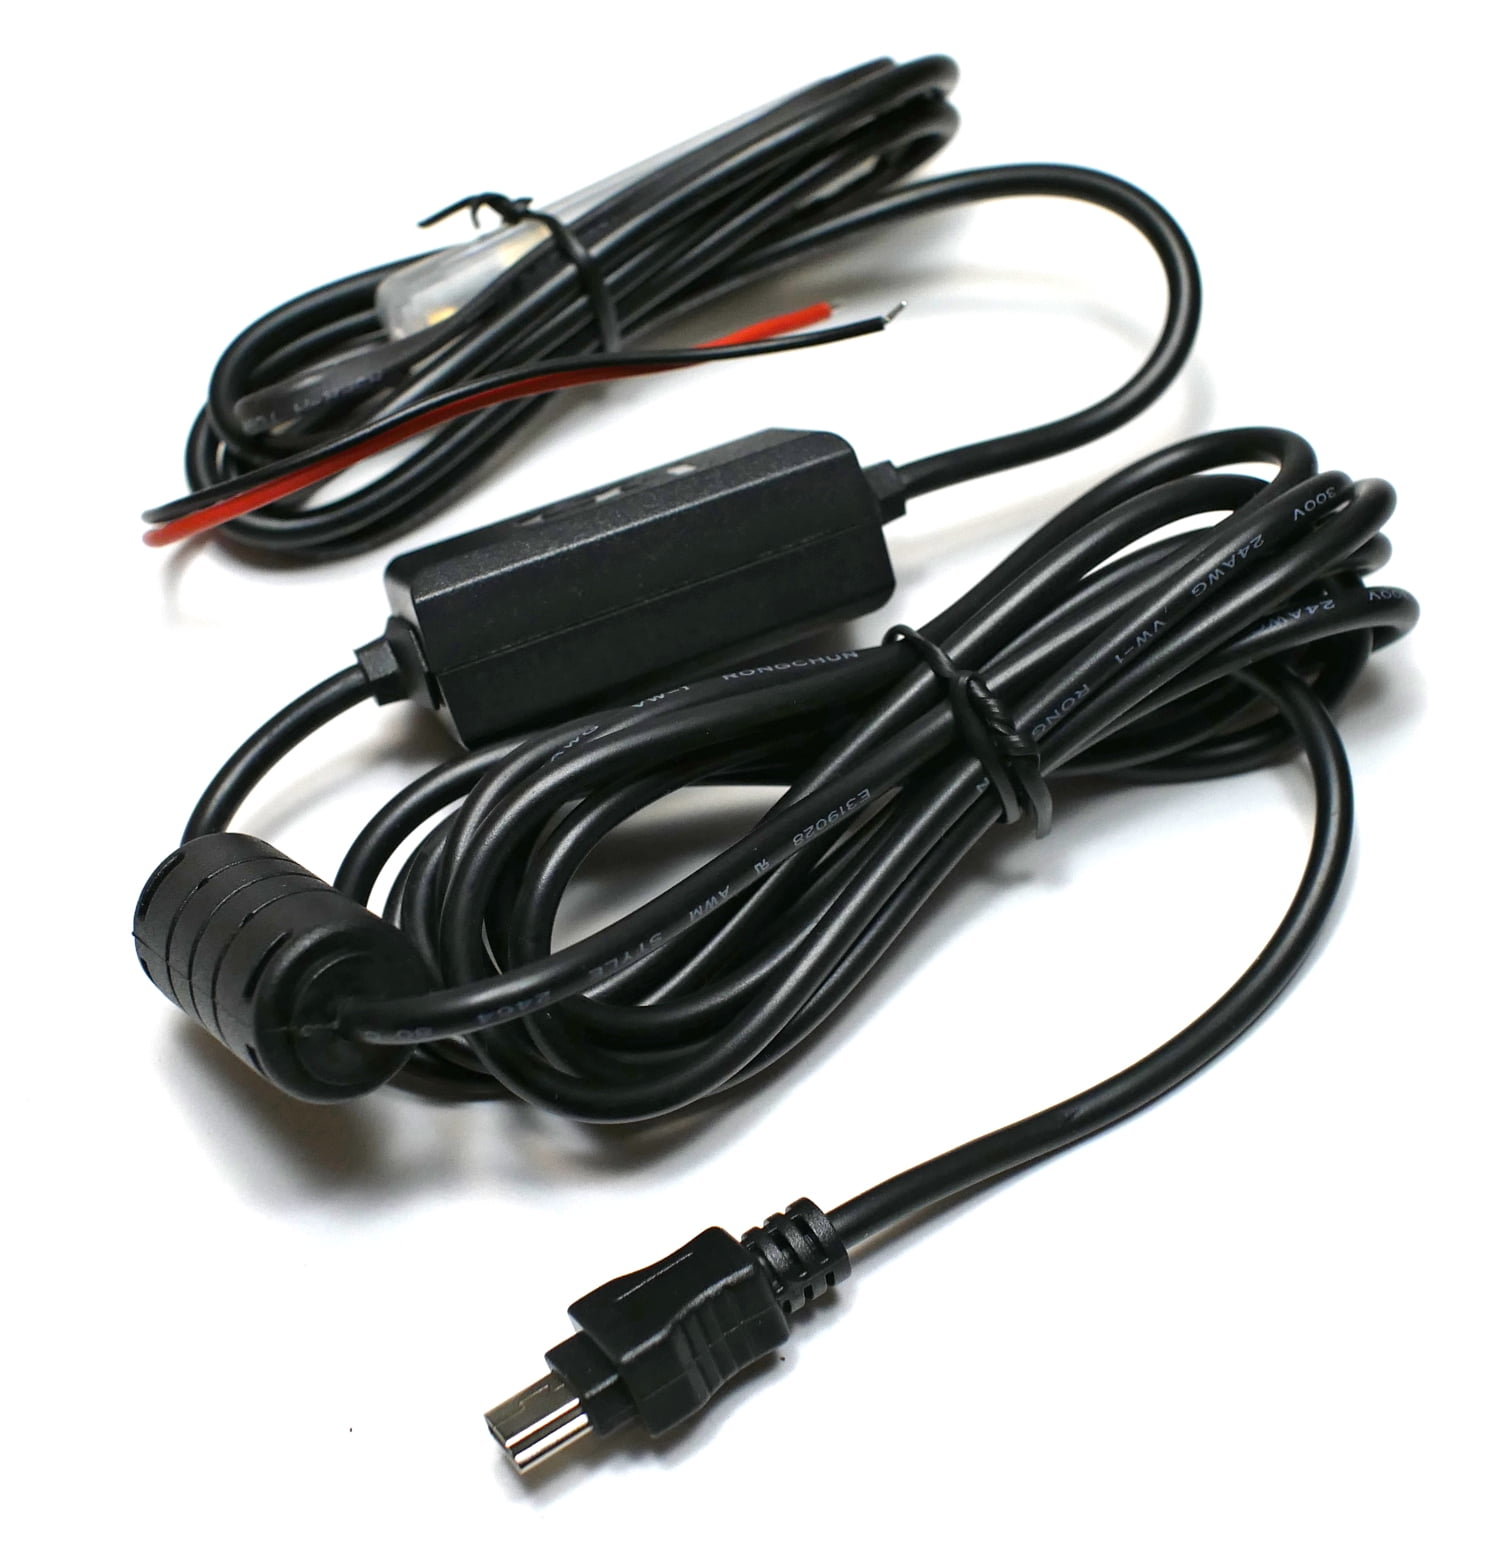 Hardwire Micro USB In Car Power Supply Lead Kit For Raspberry Pi Computer 